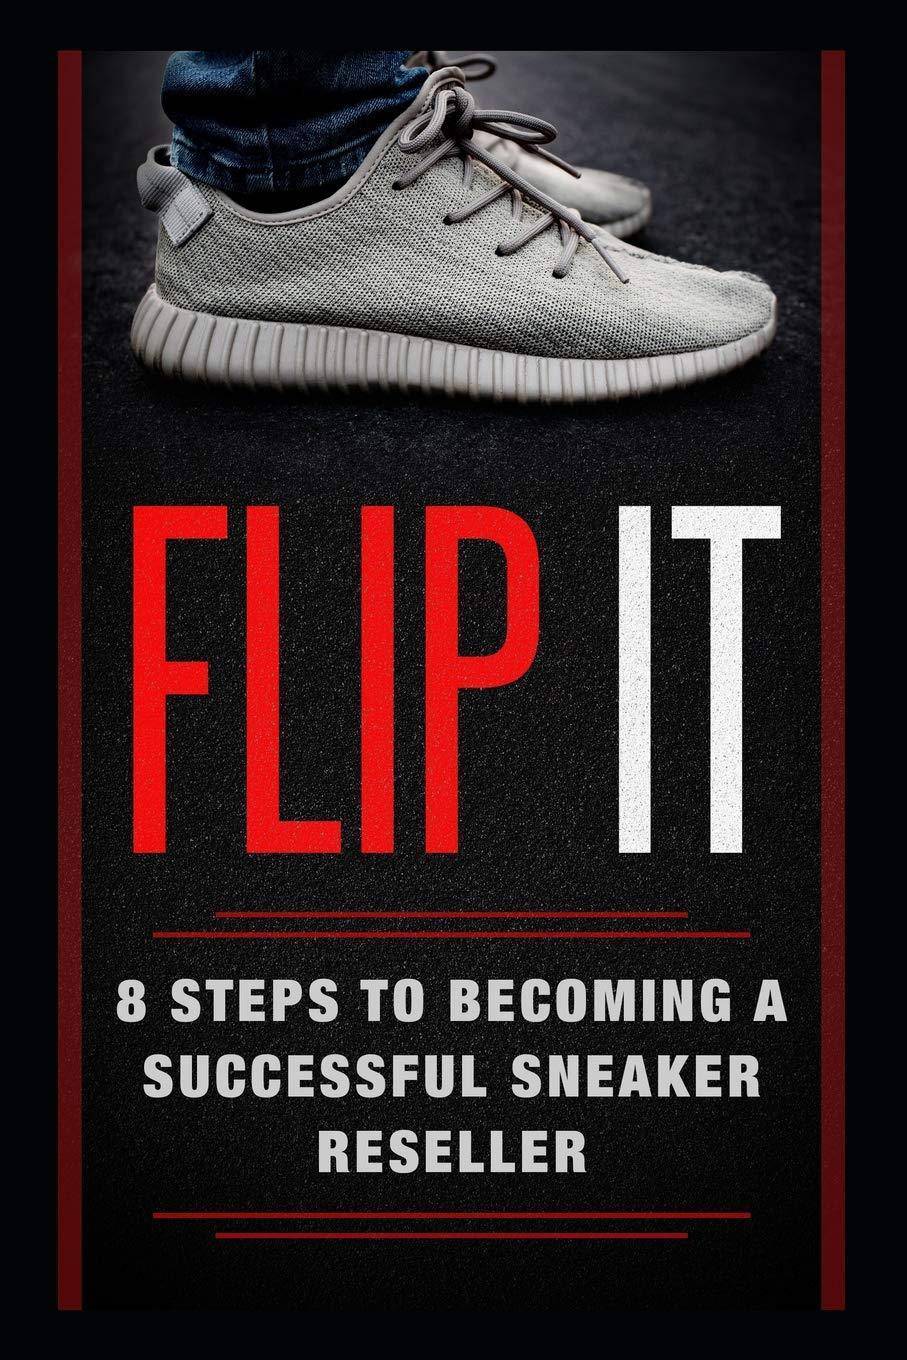 Flip It: 8 Steps to Becoming a Successful Sneaker Reseller - SureShot Books Publishing LLC